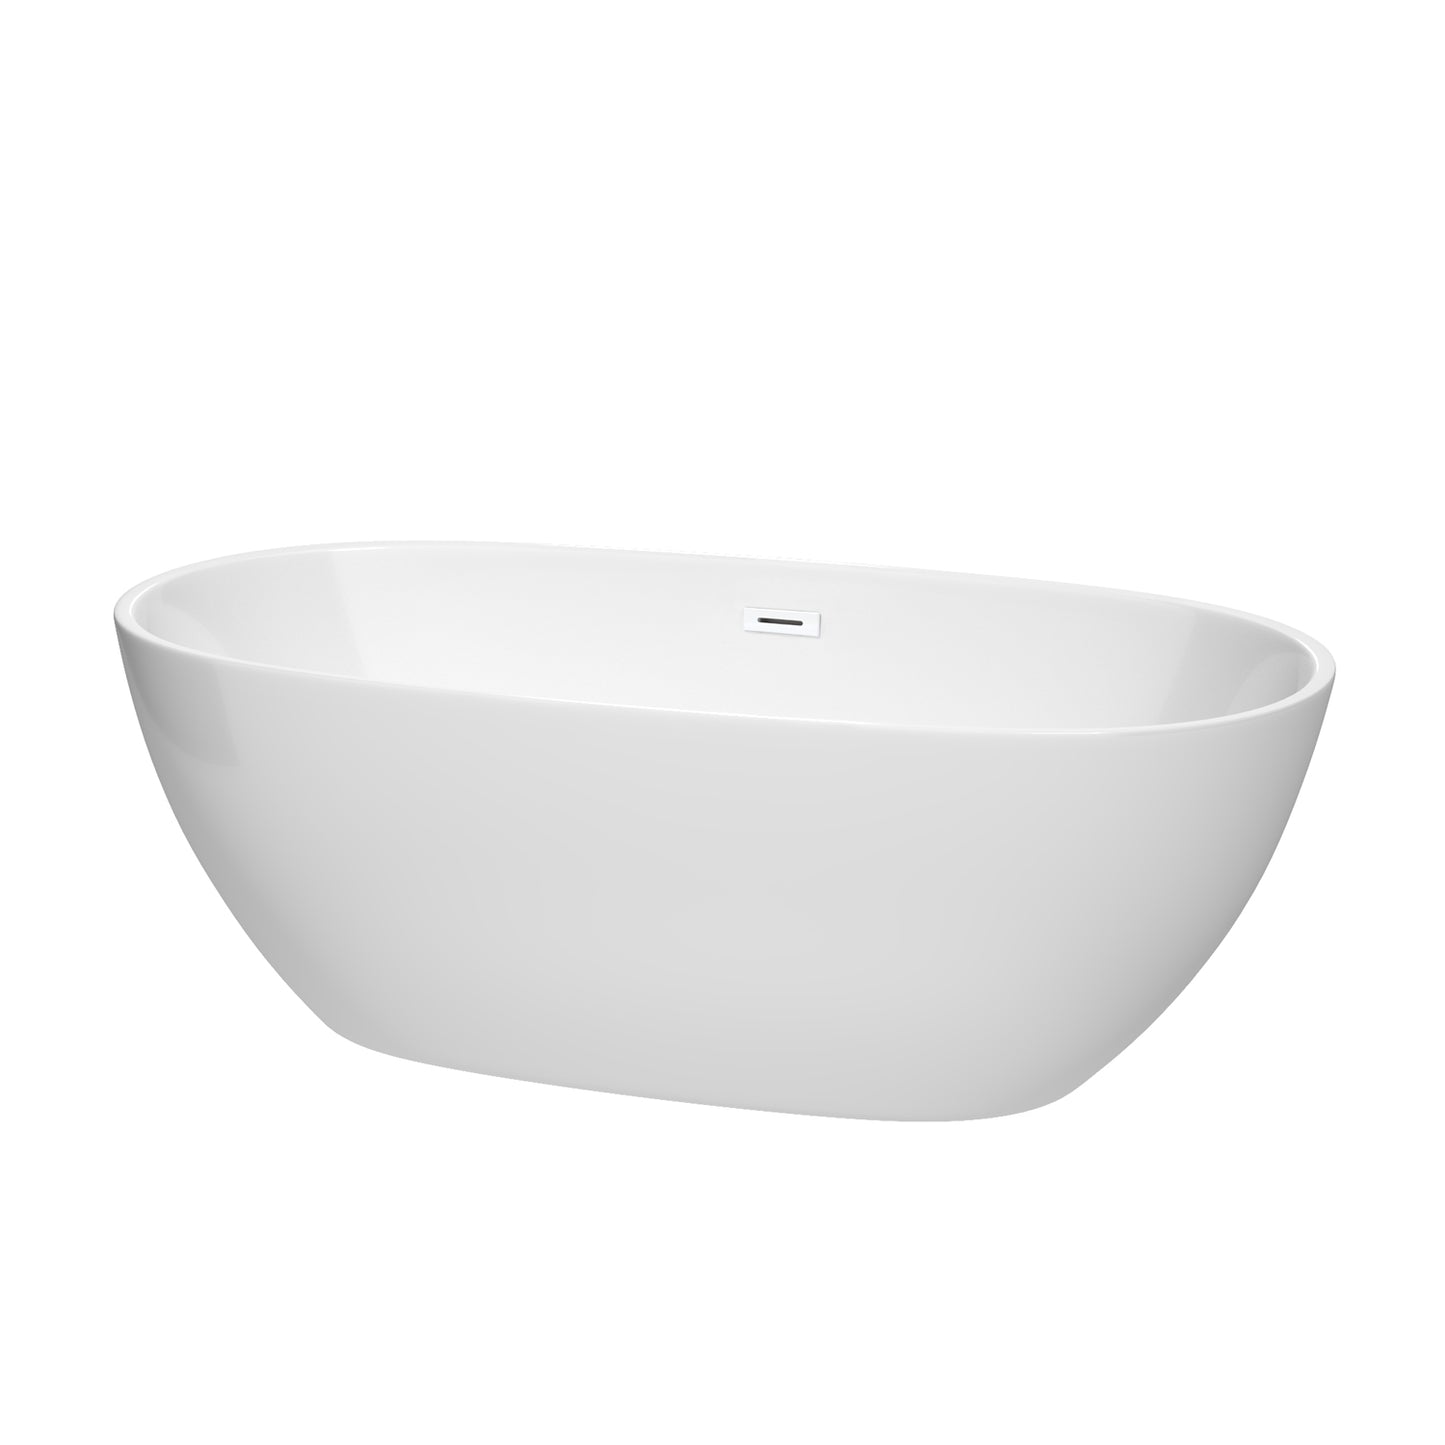 Wyndham Collection Juno Freestanding Bathtub in White with Shiny White Drain and Overflow Trim - Luxe Bathroom Vanities